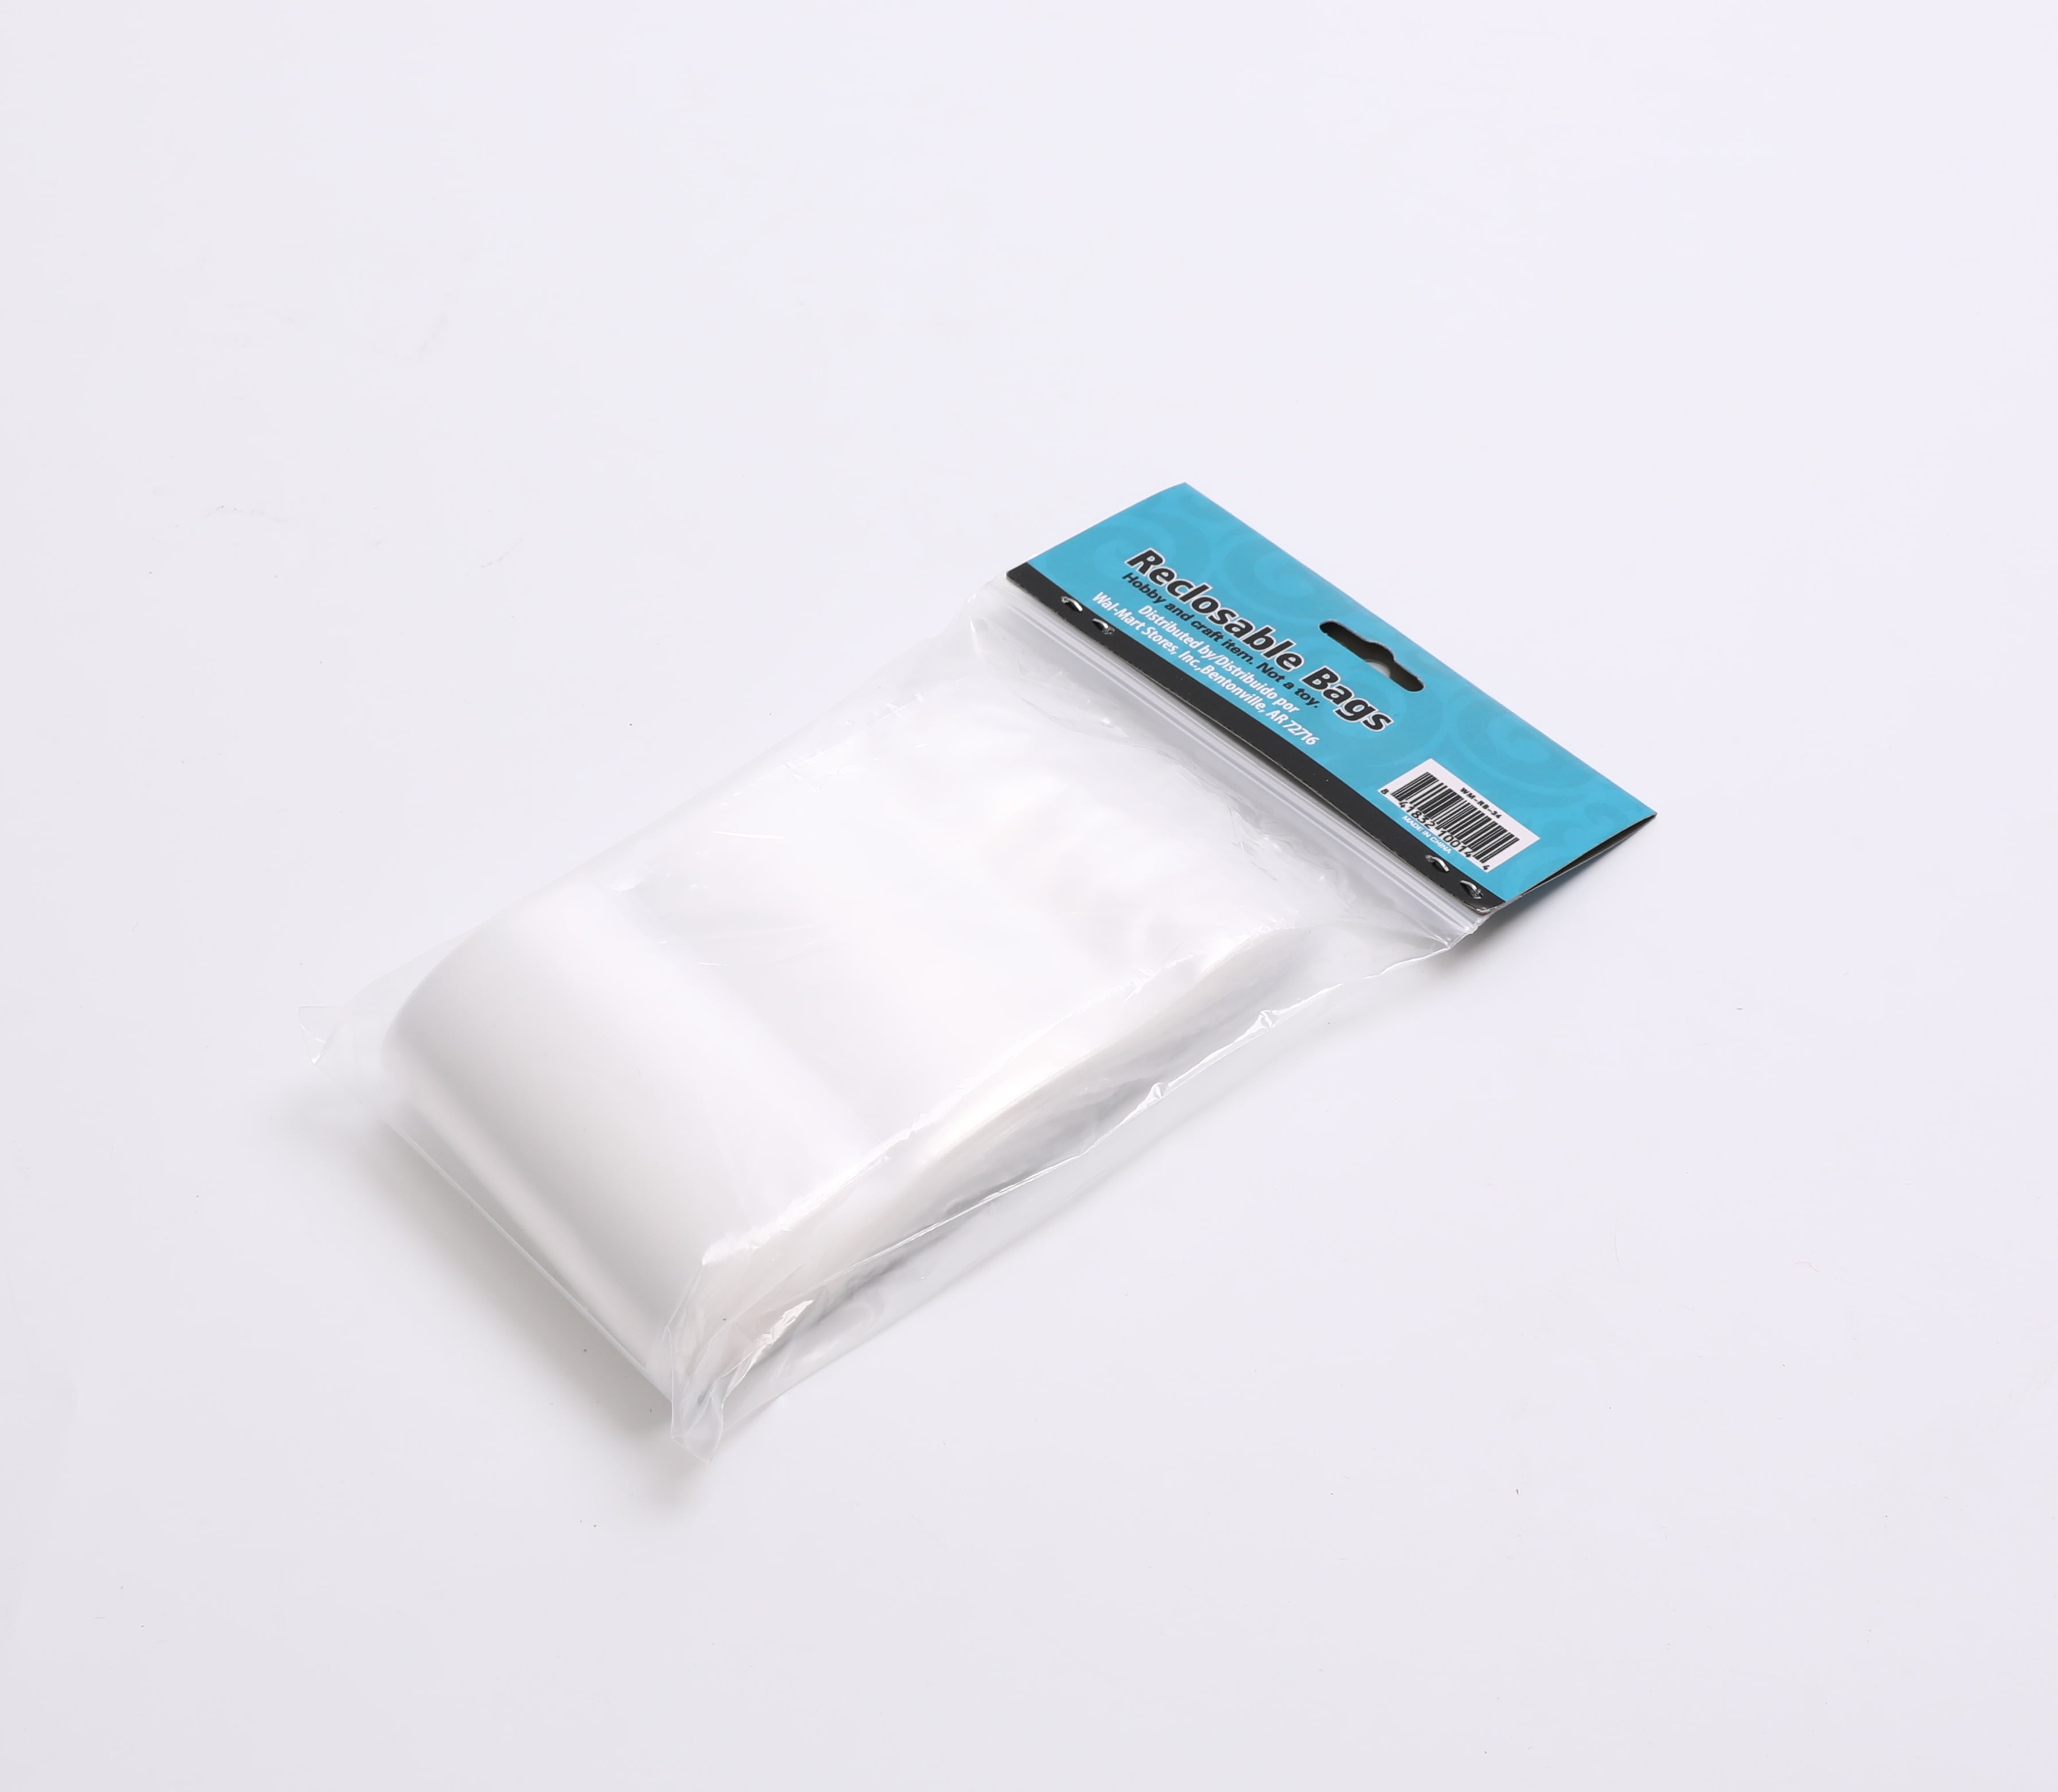 White/Clear Self Seal Zipper Plastic Retail Packaging Pack Poly Bag Ziplock  Pouches Reclosable Packaging Bag Hang Hole (6x10cm(2.4x3.9), 100 pcs)